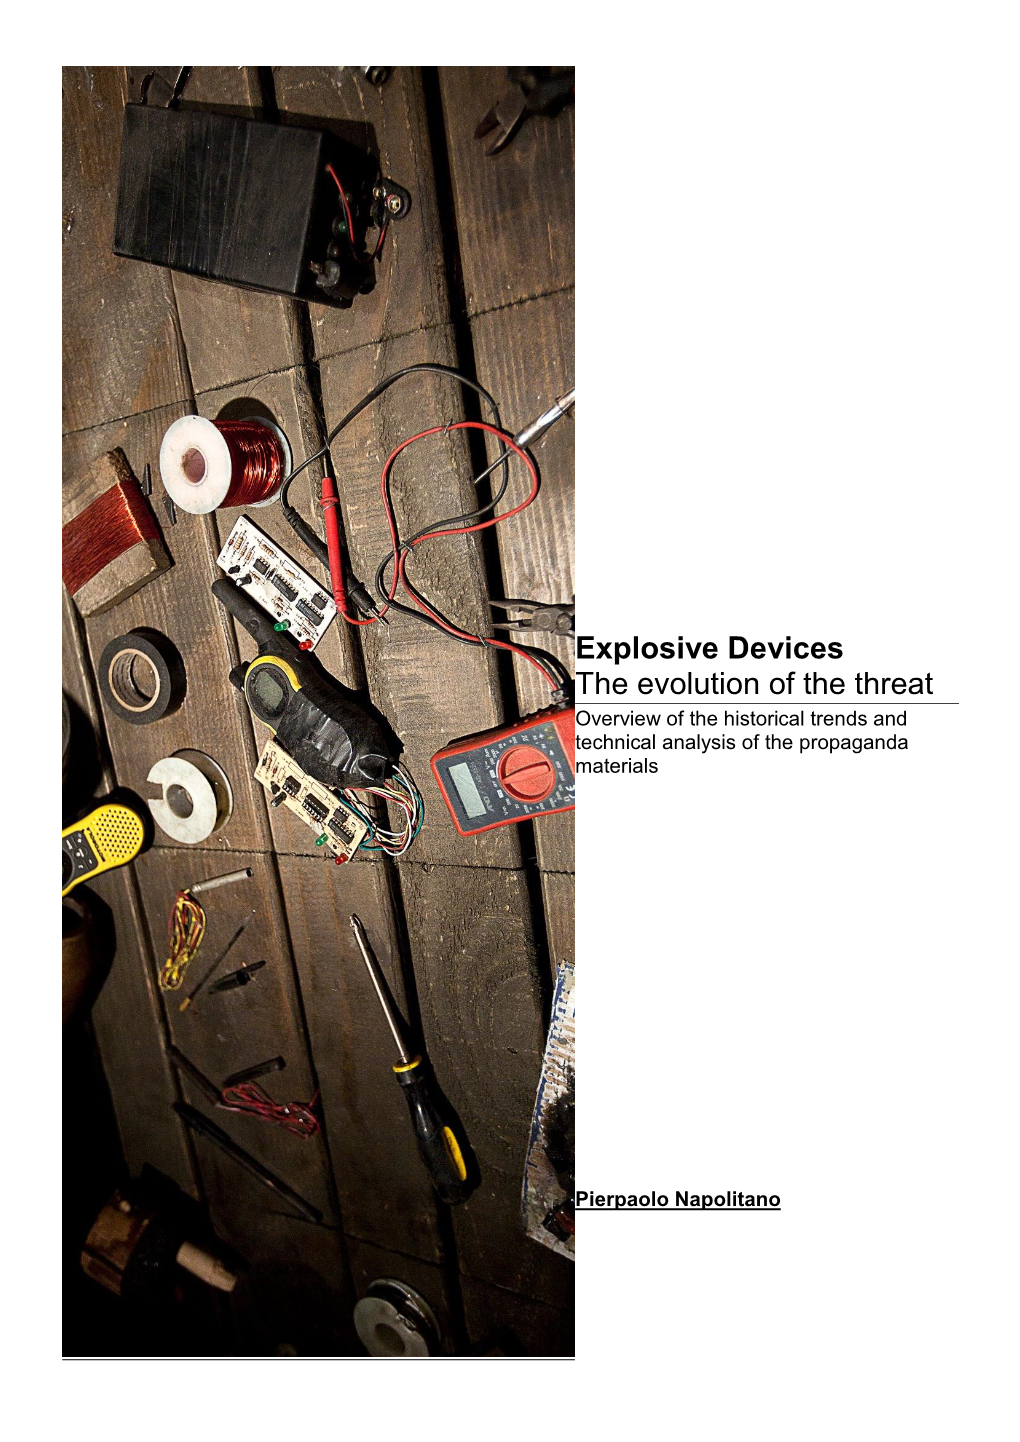 Explosive Devices the Evolution of the Threat Overview of the Historical Trends and Technical Analysis of the Propaganda Materials